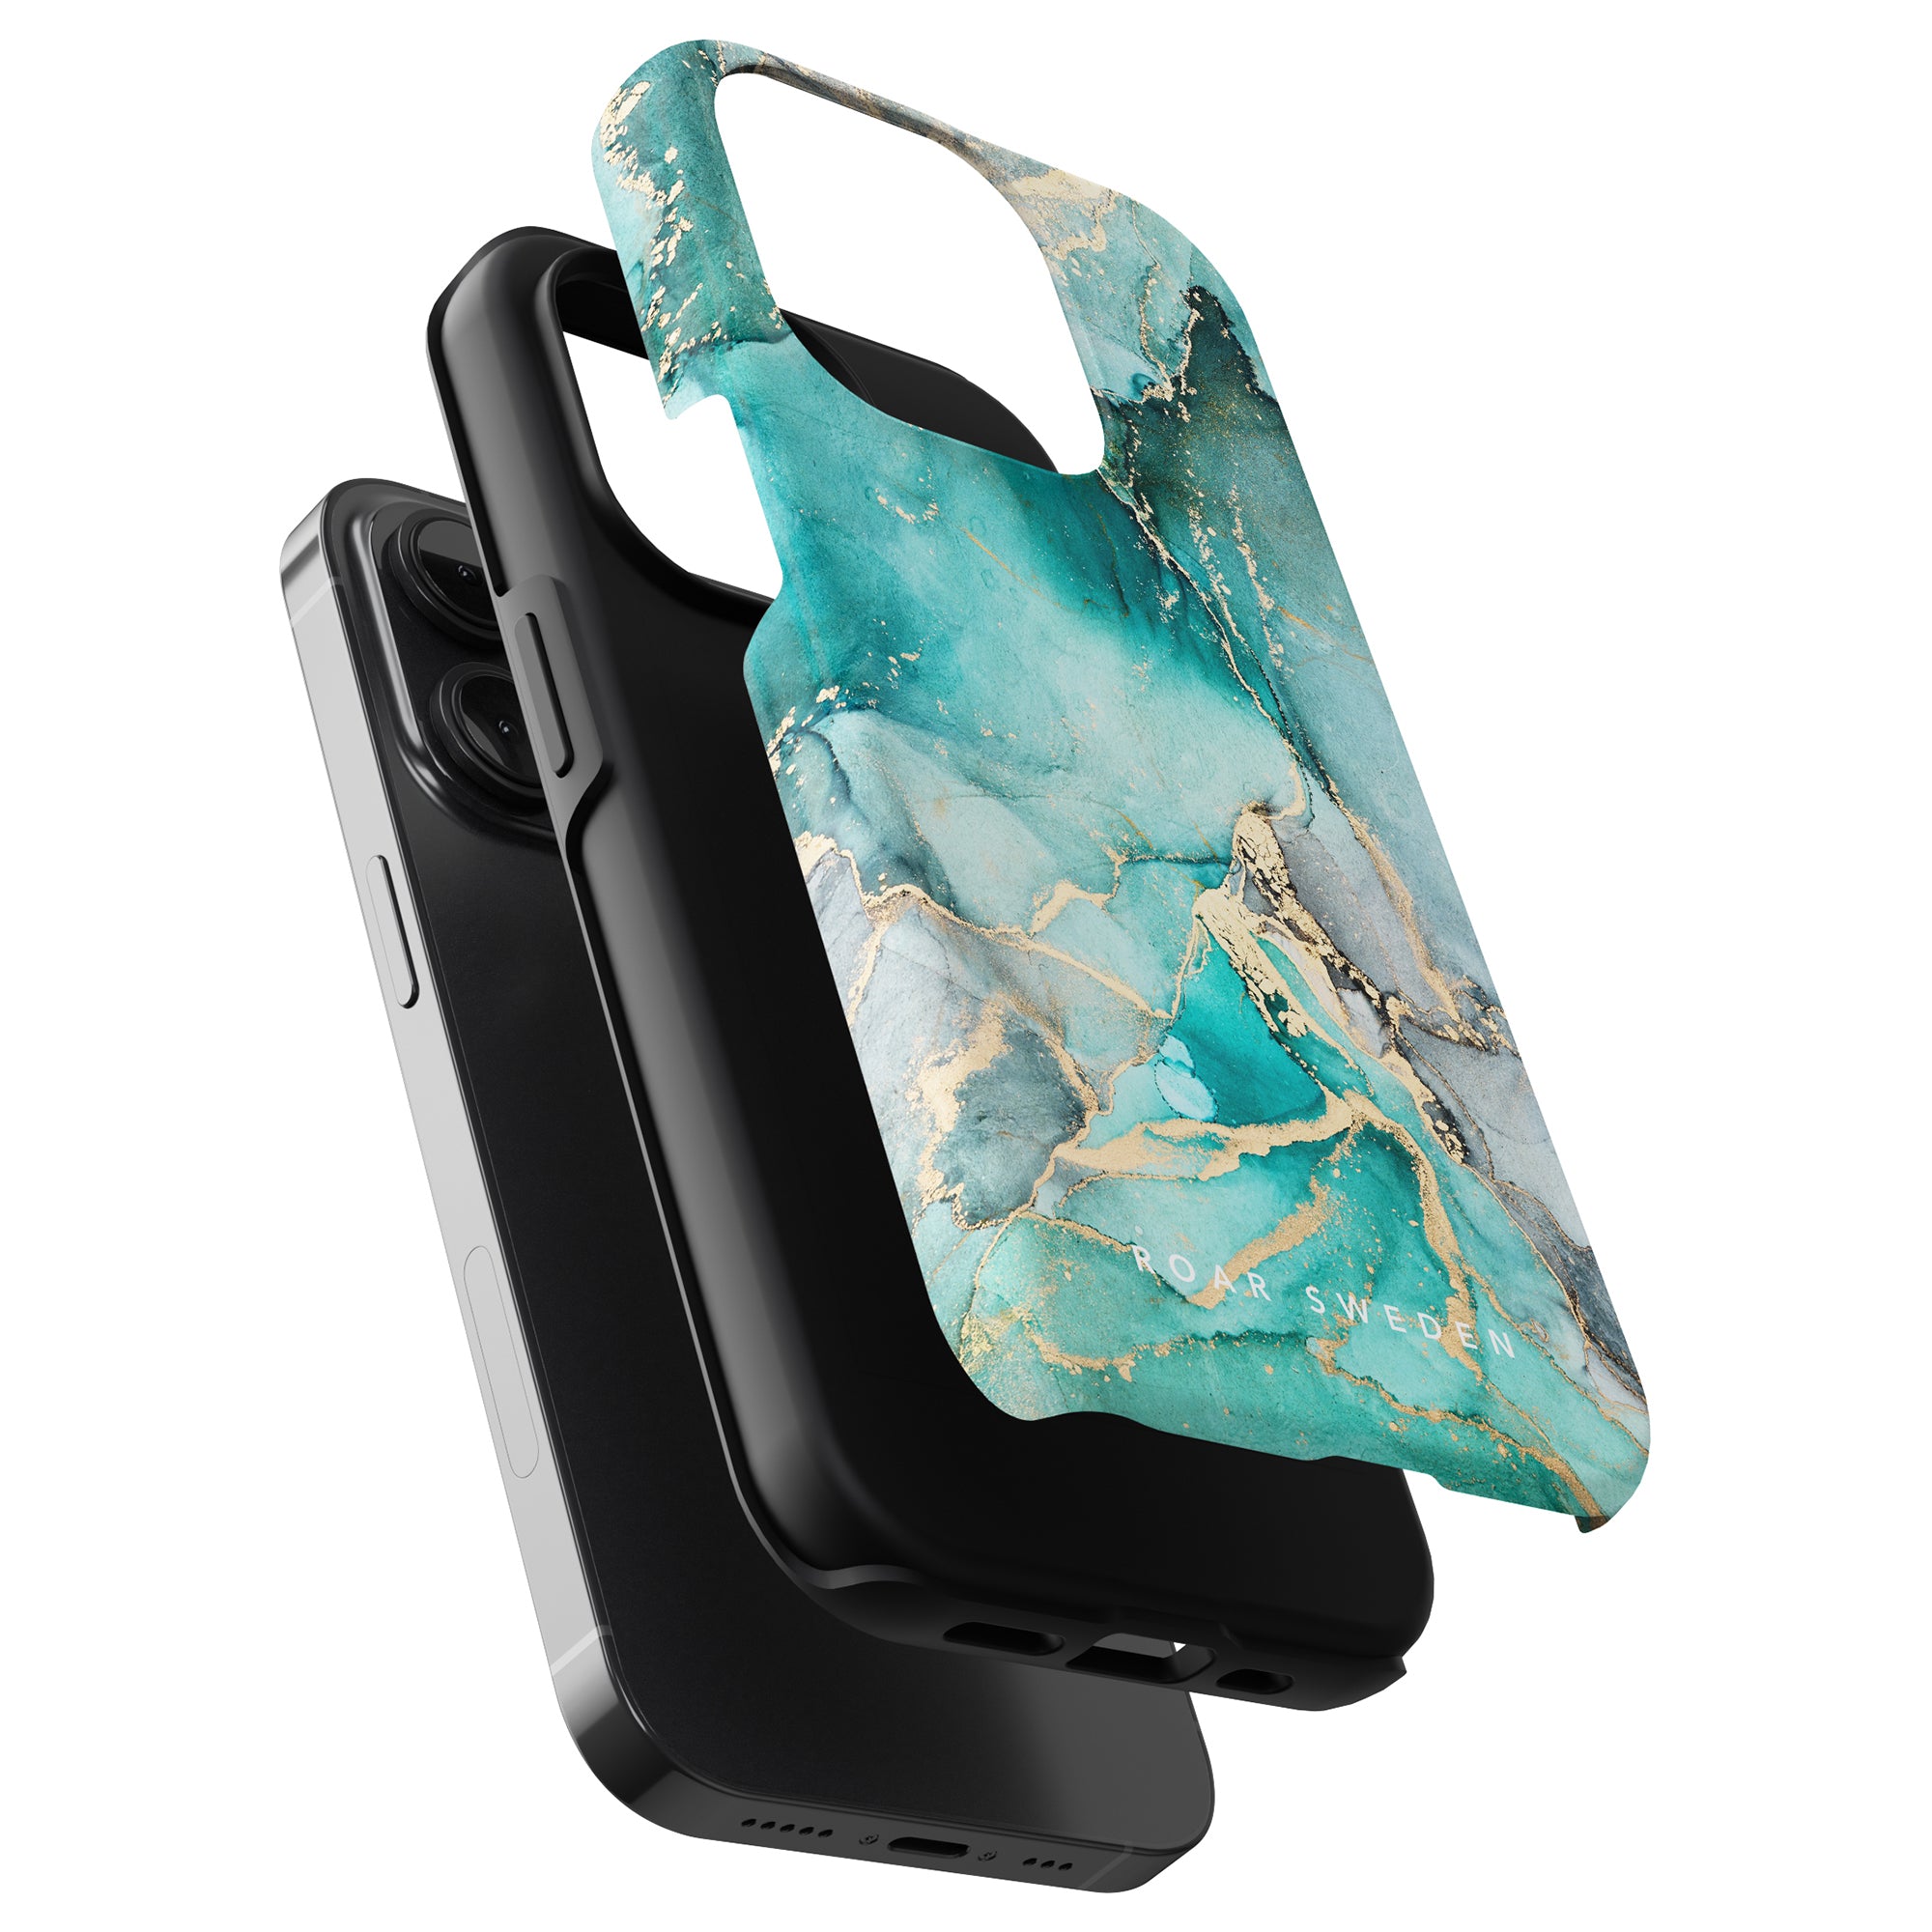 Two smartphones in black Ferozah Tough Cases, one with a turquoise and gold marbled cover, displayed against a white background.